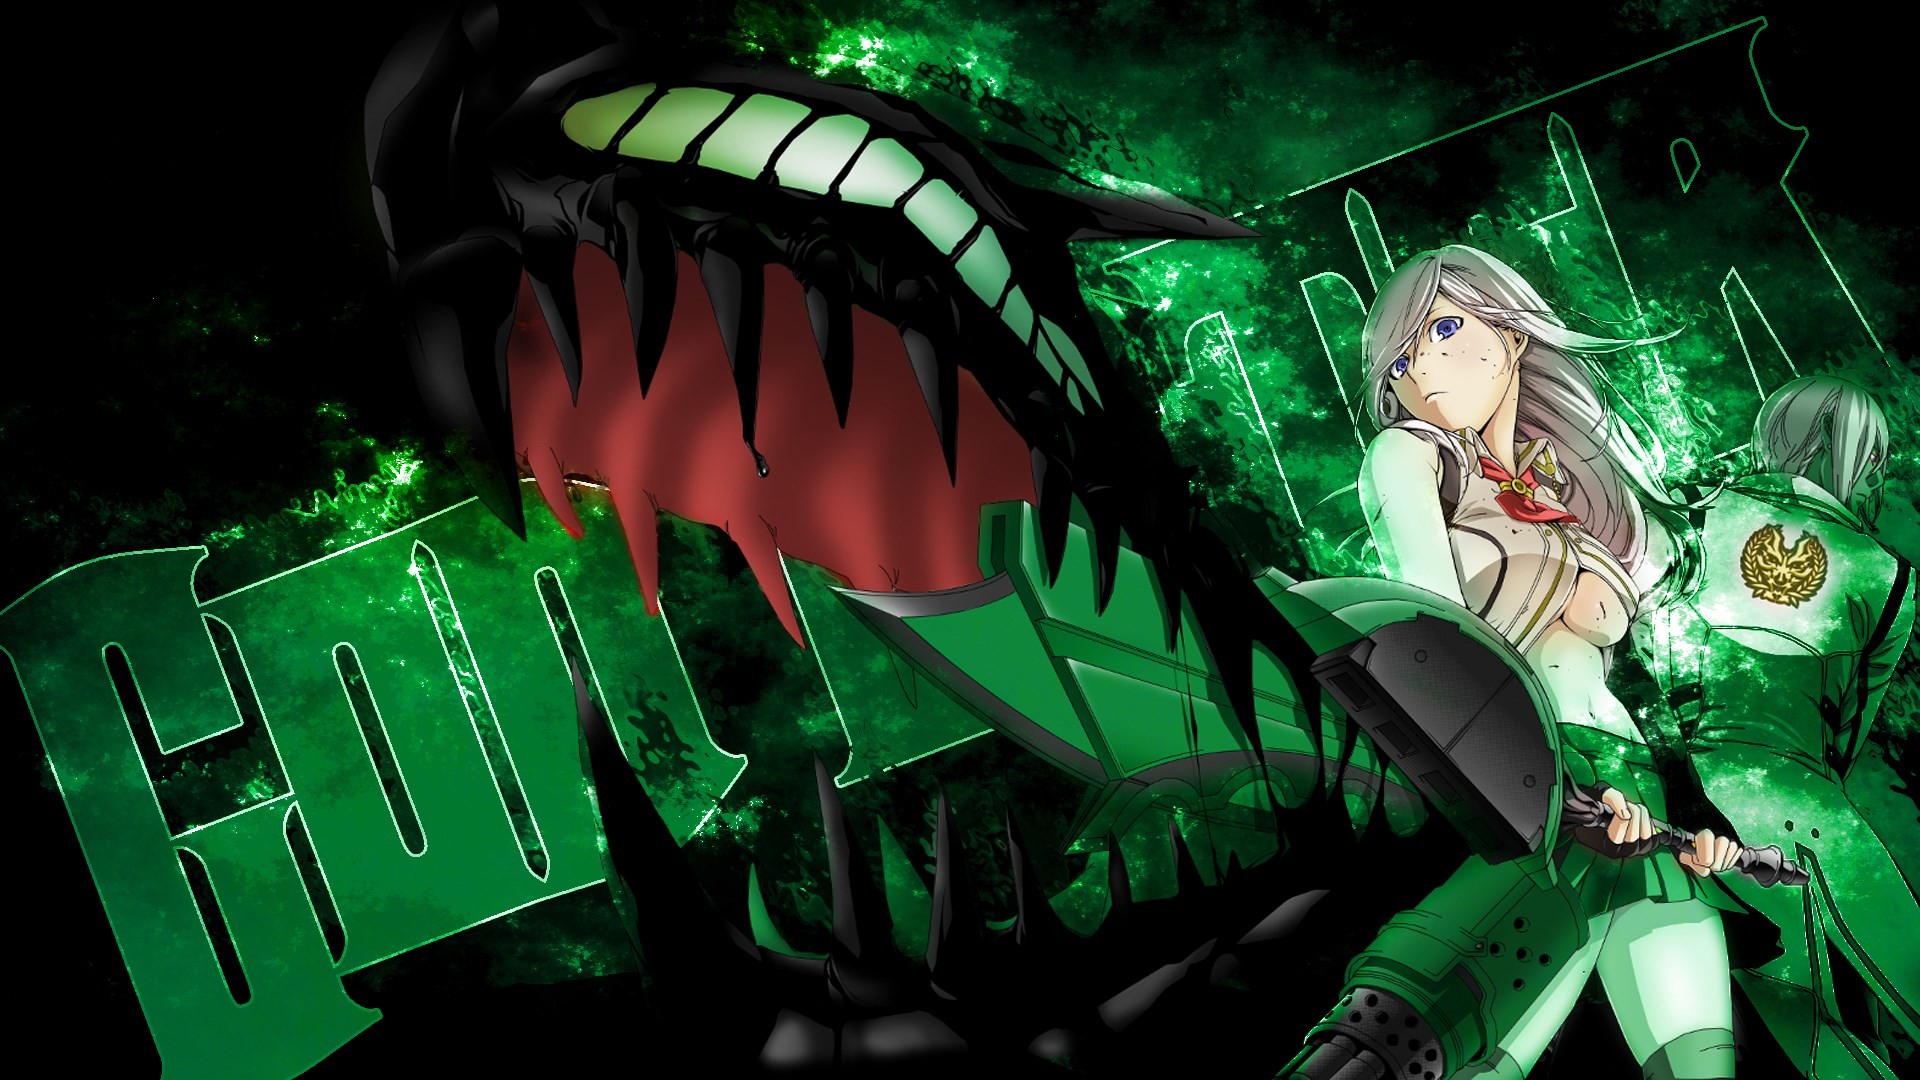 God Eater Wallpapers 85 Images